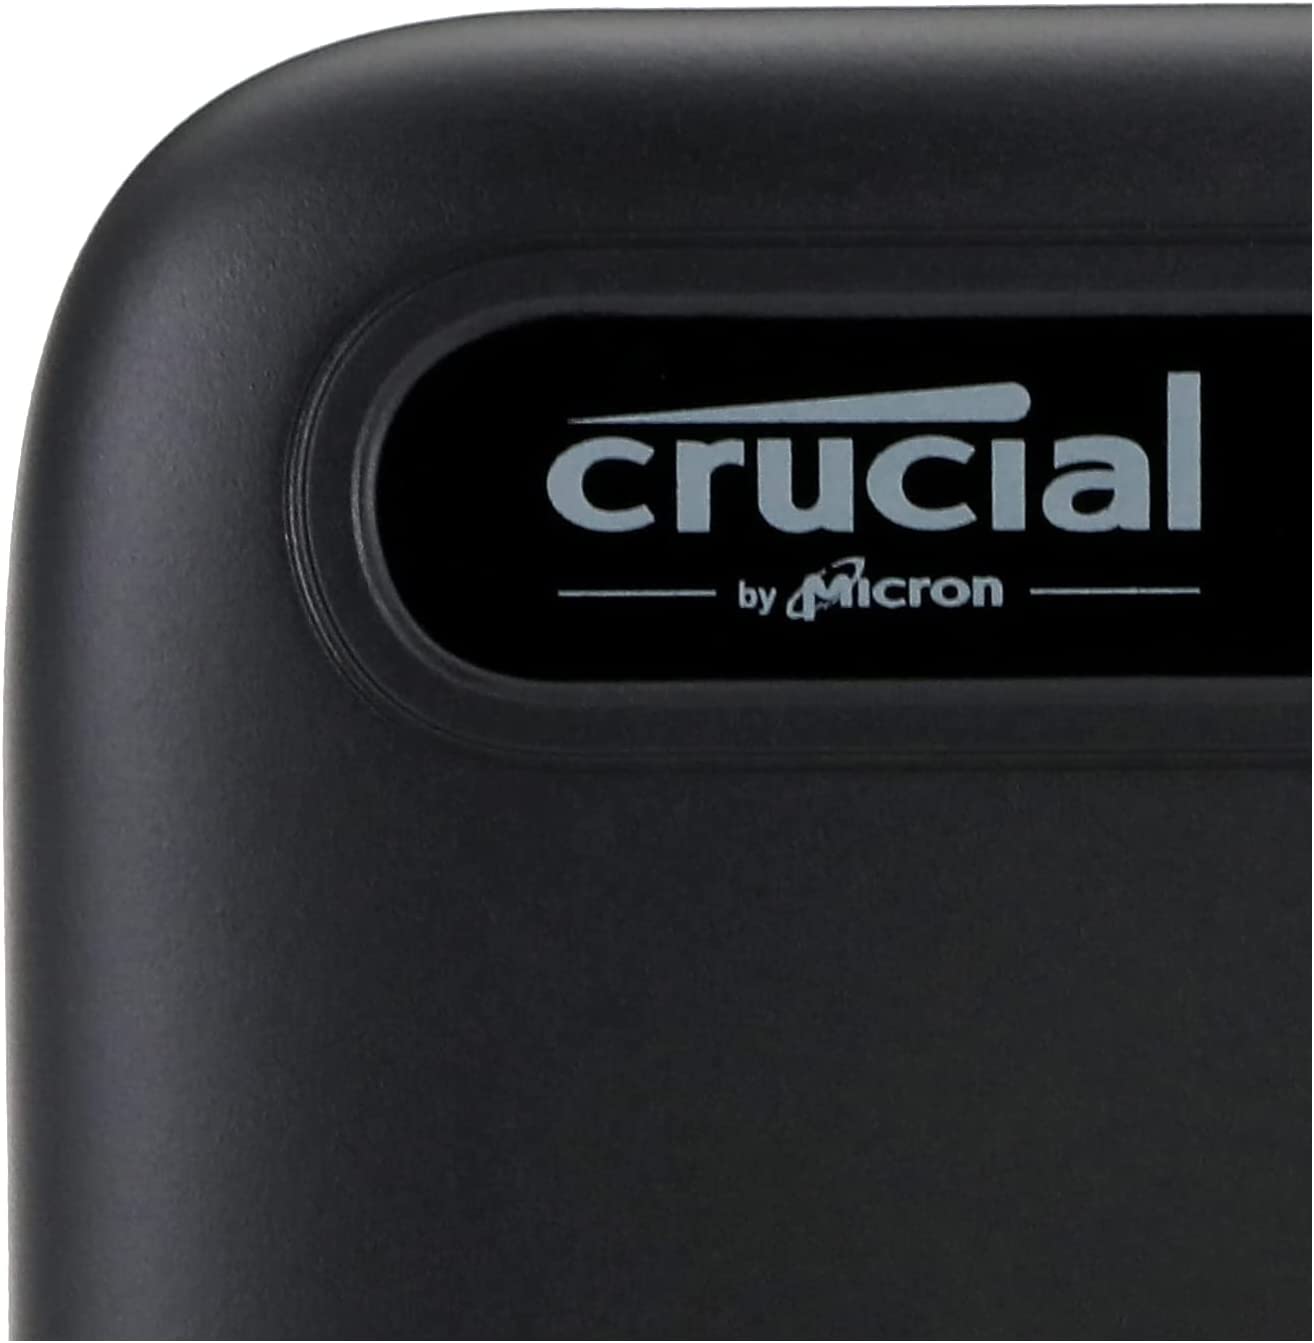 $169.99: Crucial X6 4TB Portable SSD - Up to 800MB/s (Prime Members)